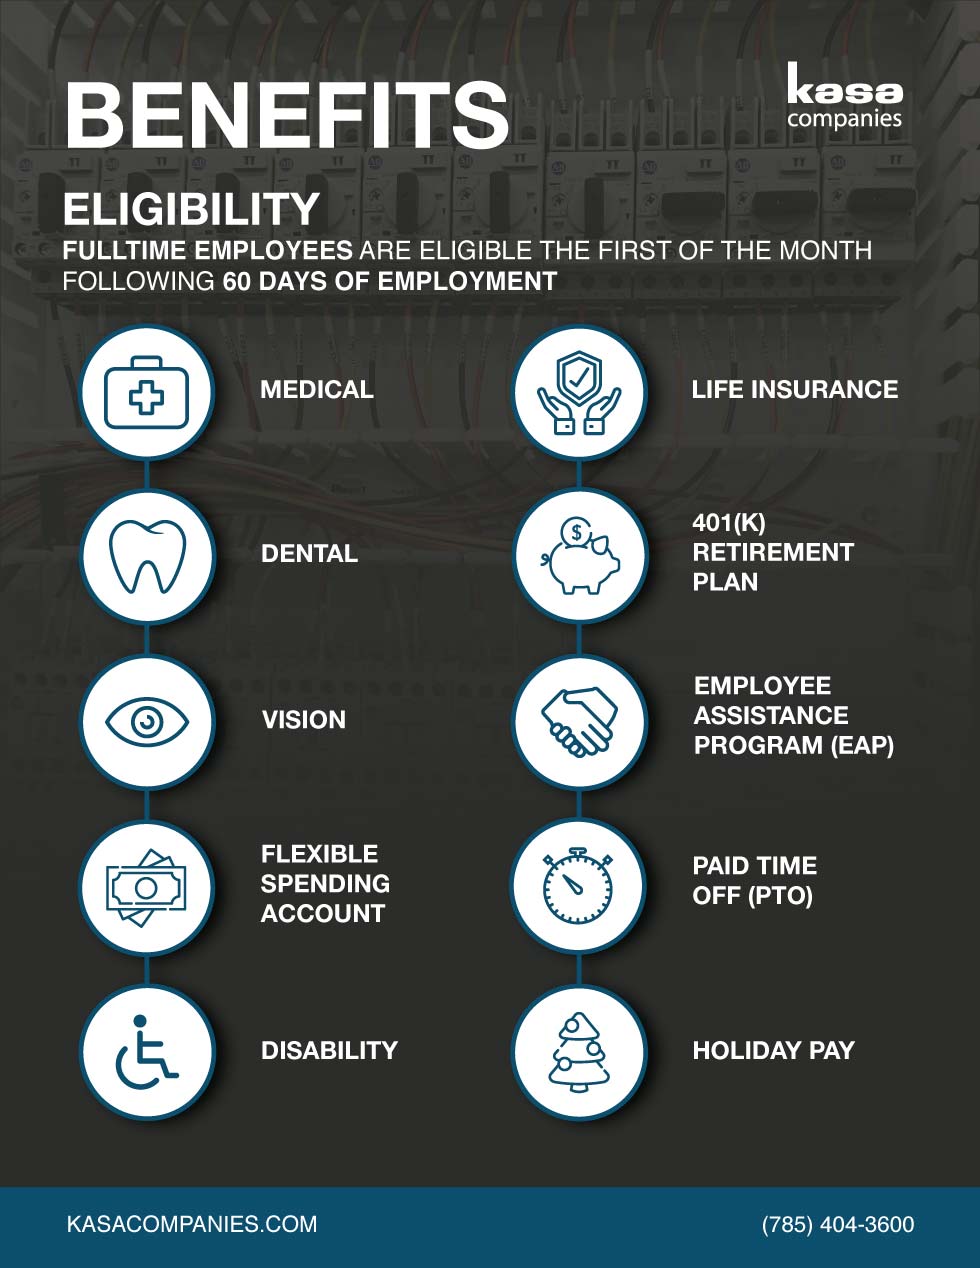 Overview of Benefits